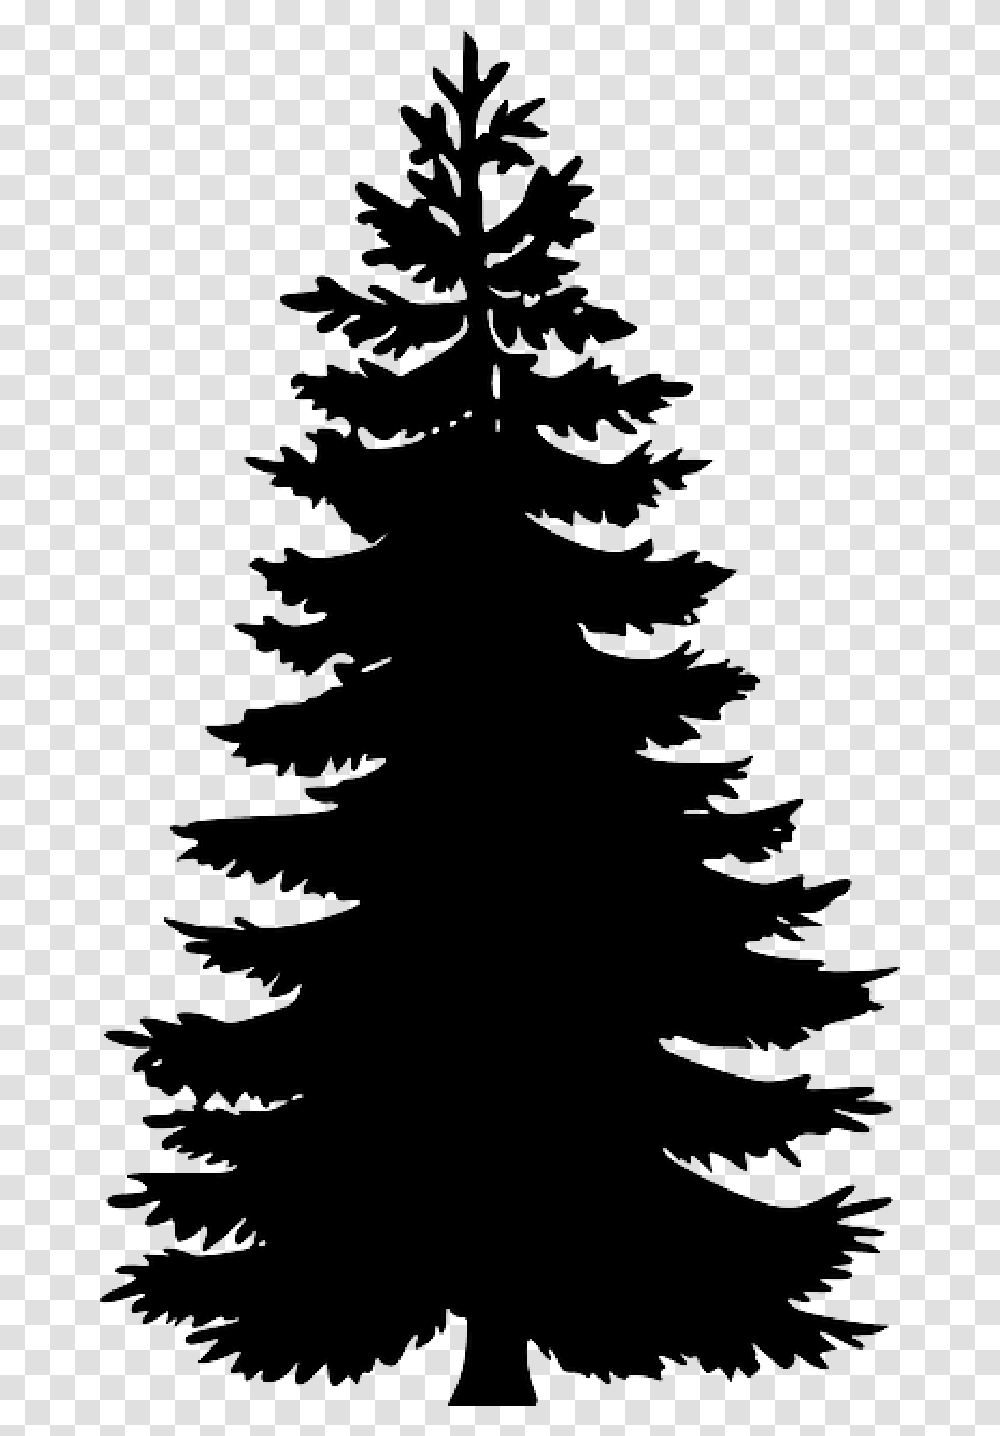 Black Evergreen Large Outline Silhouette Tree Pine Tree Vector, Plant, Ornament, Christmas Tree, Fir Transparent Png